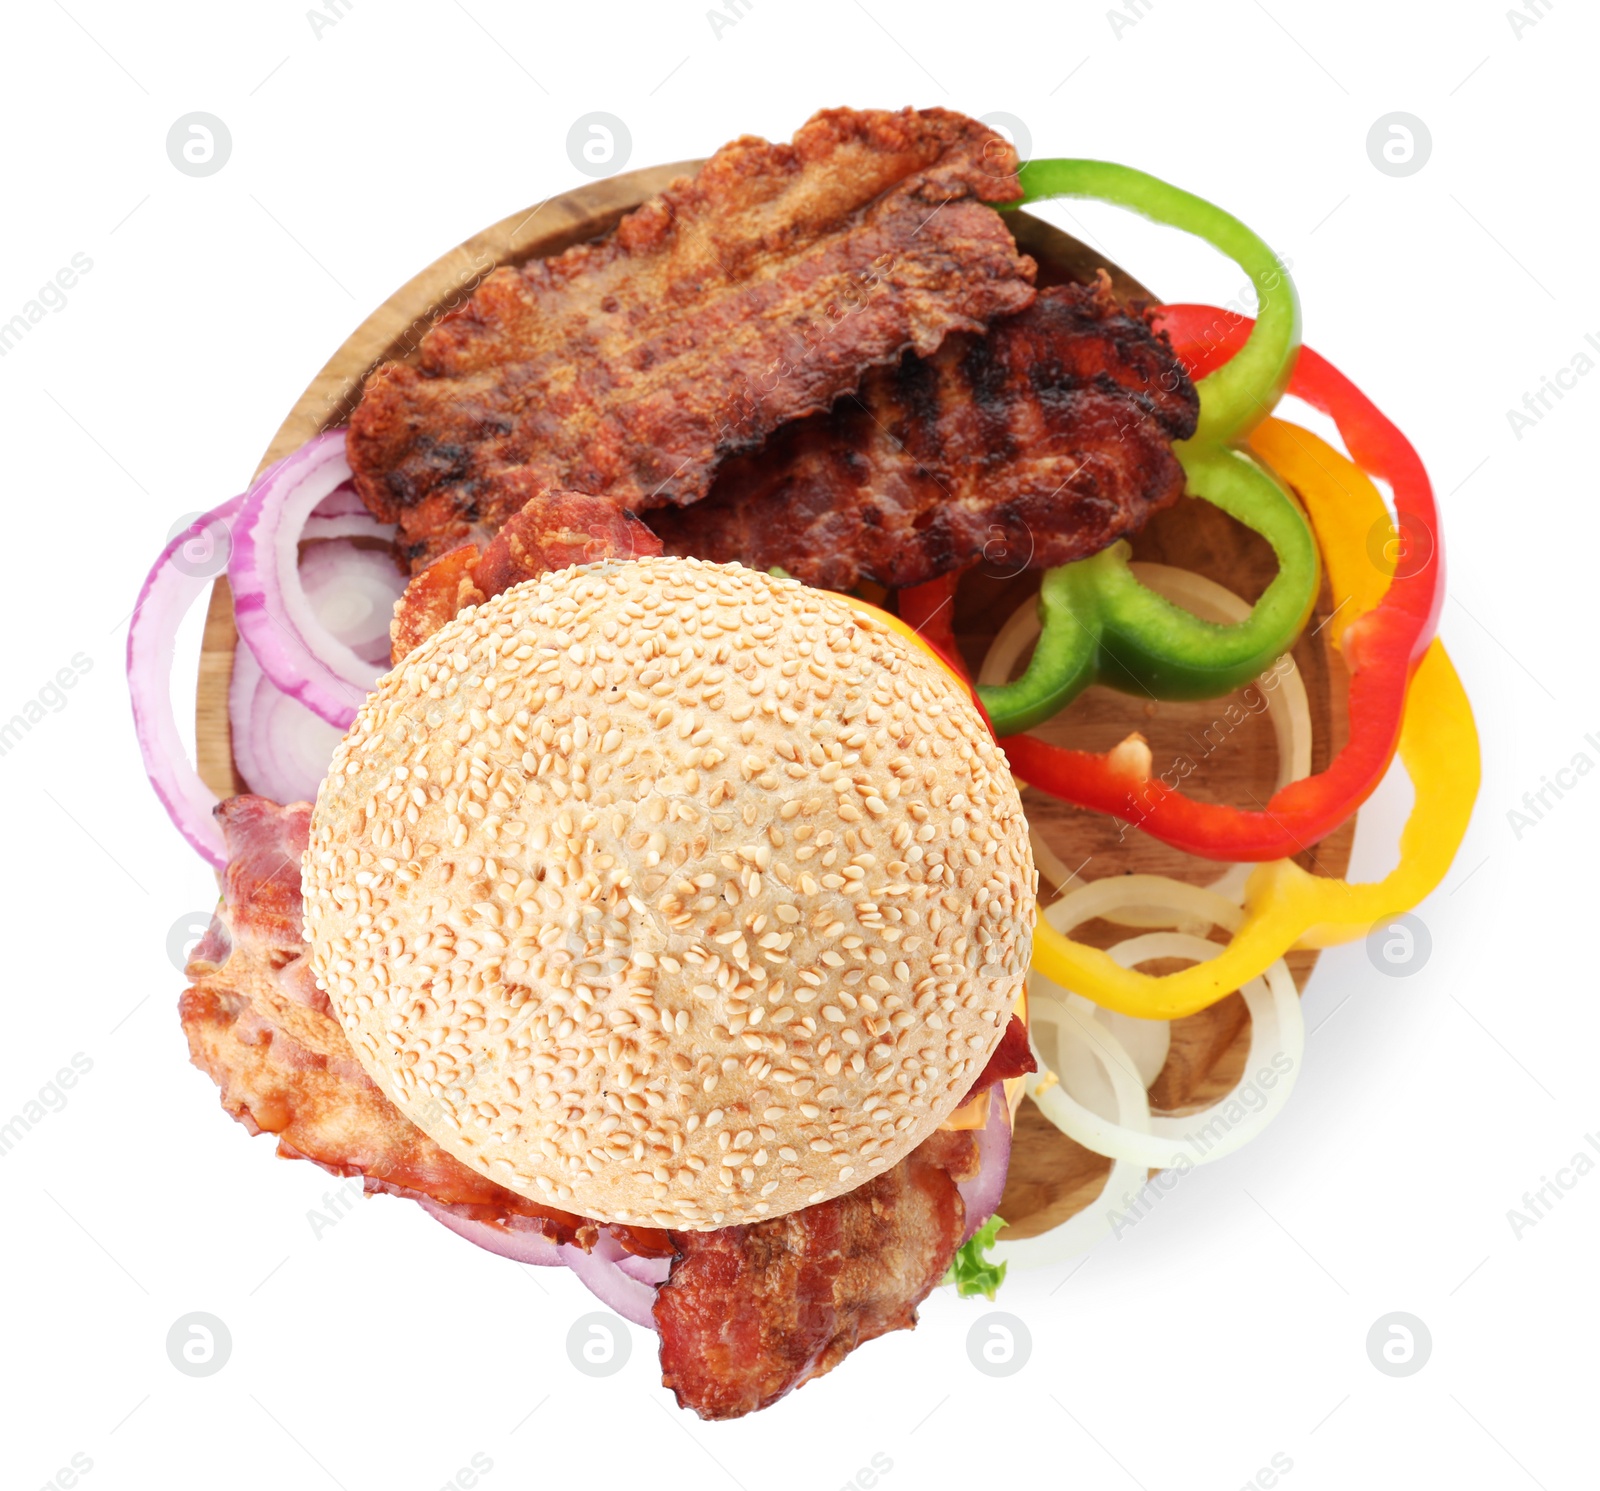 Image of Tasty burger with bacon on white background, top view